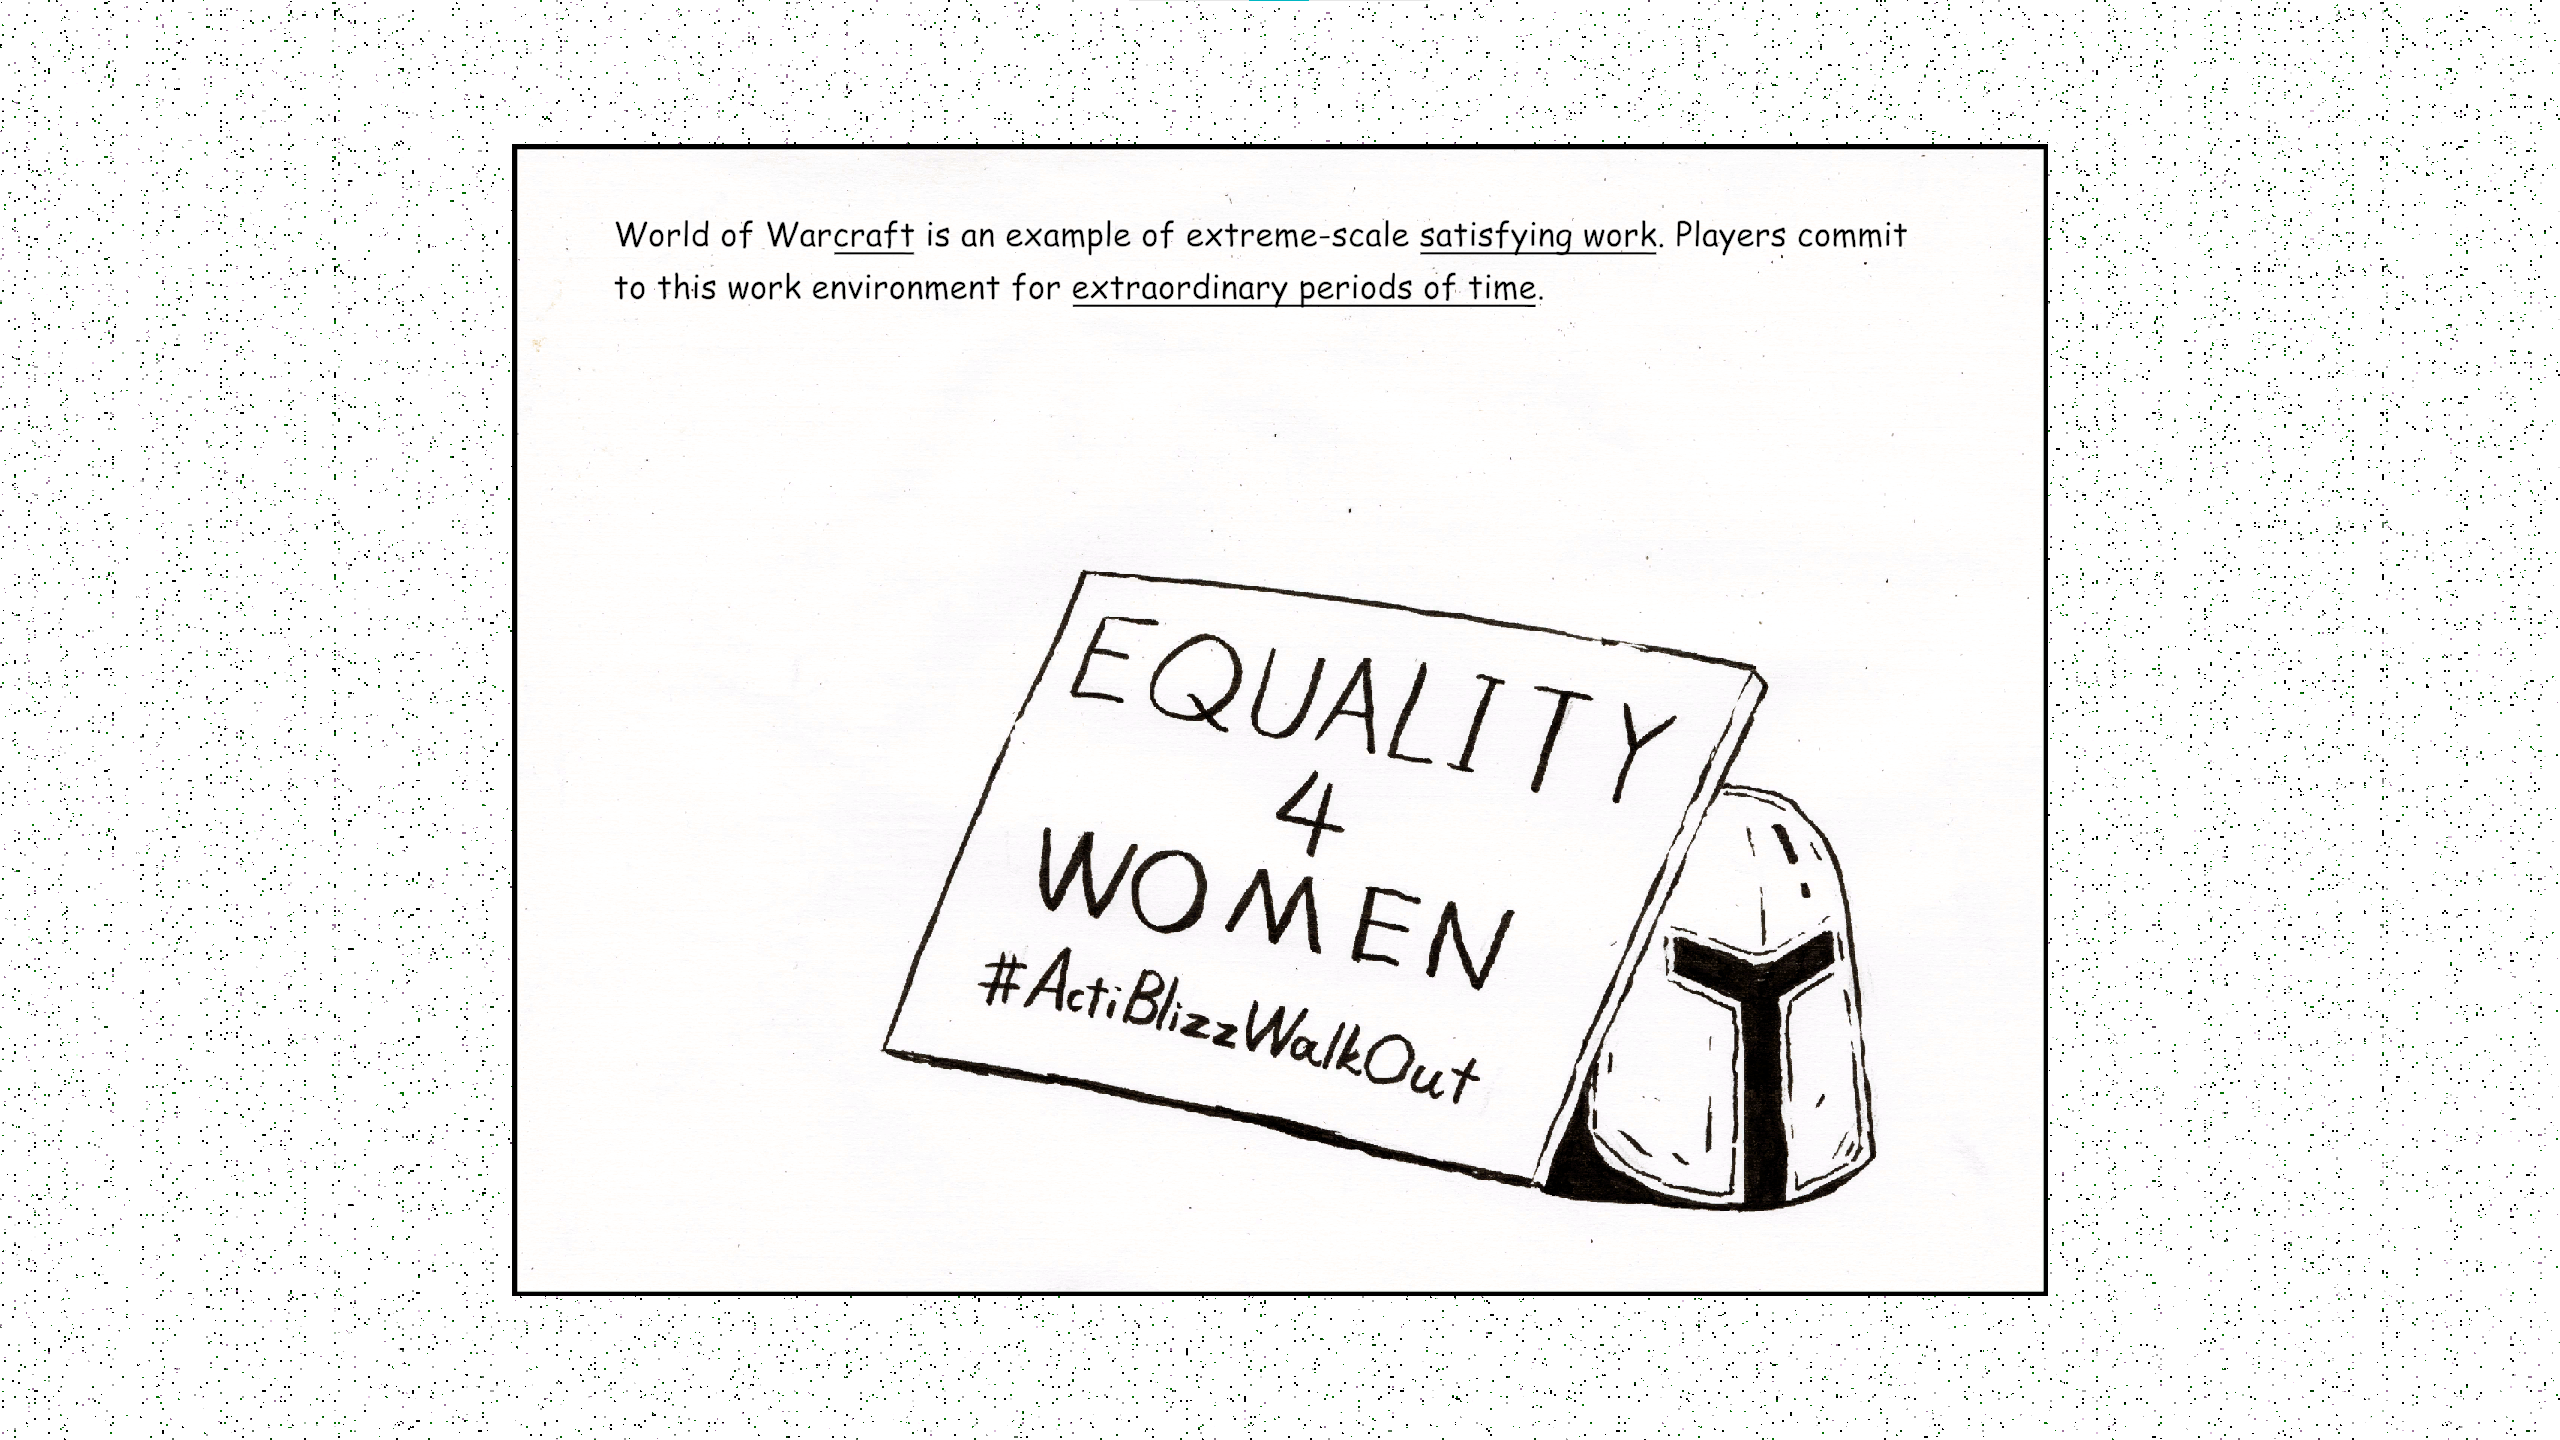 Equality 4 Women sign propped up by a helmet